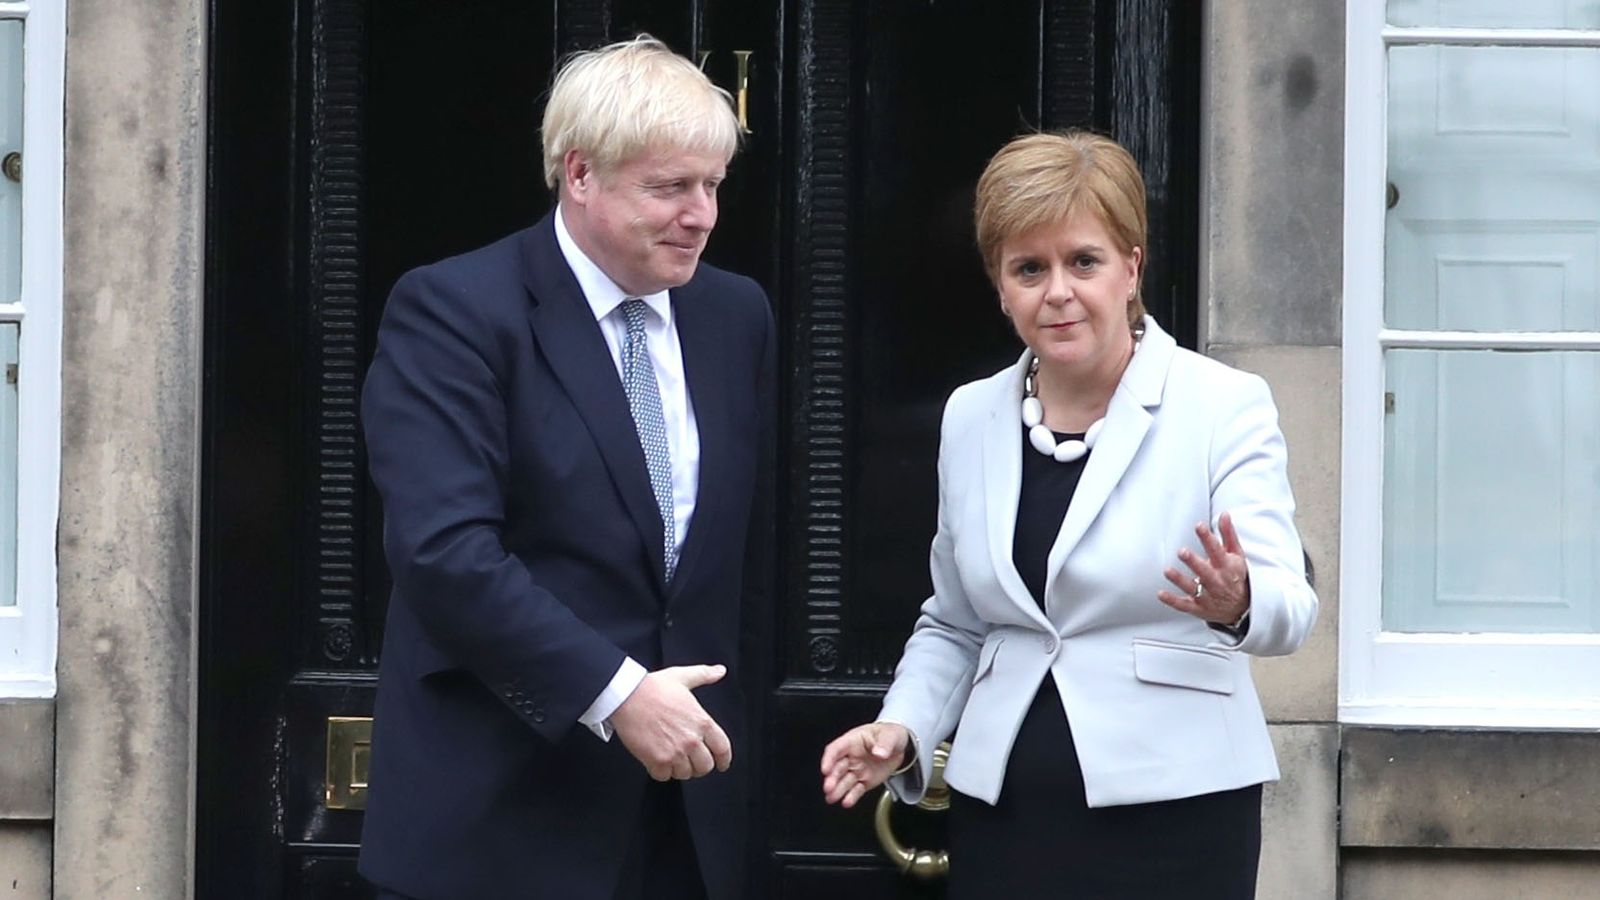 UK COVID inquiry: Nicola Sturgeon branded Boris Johnson a 'clown' in foul-mouthed messages during pandemic